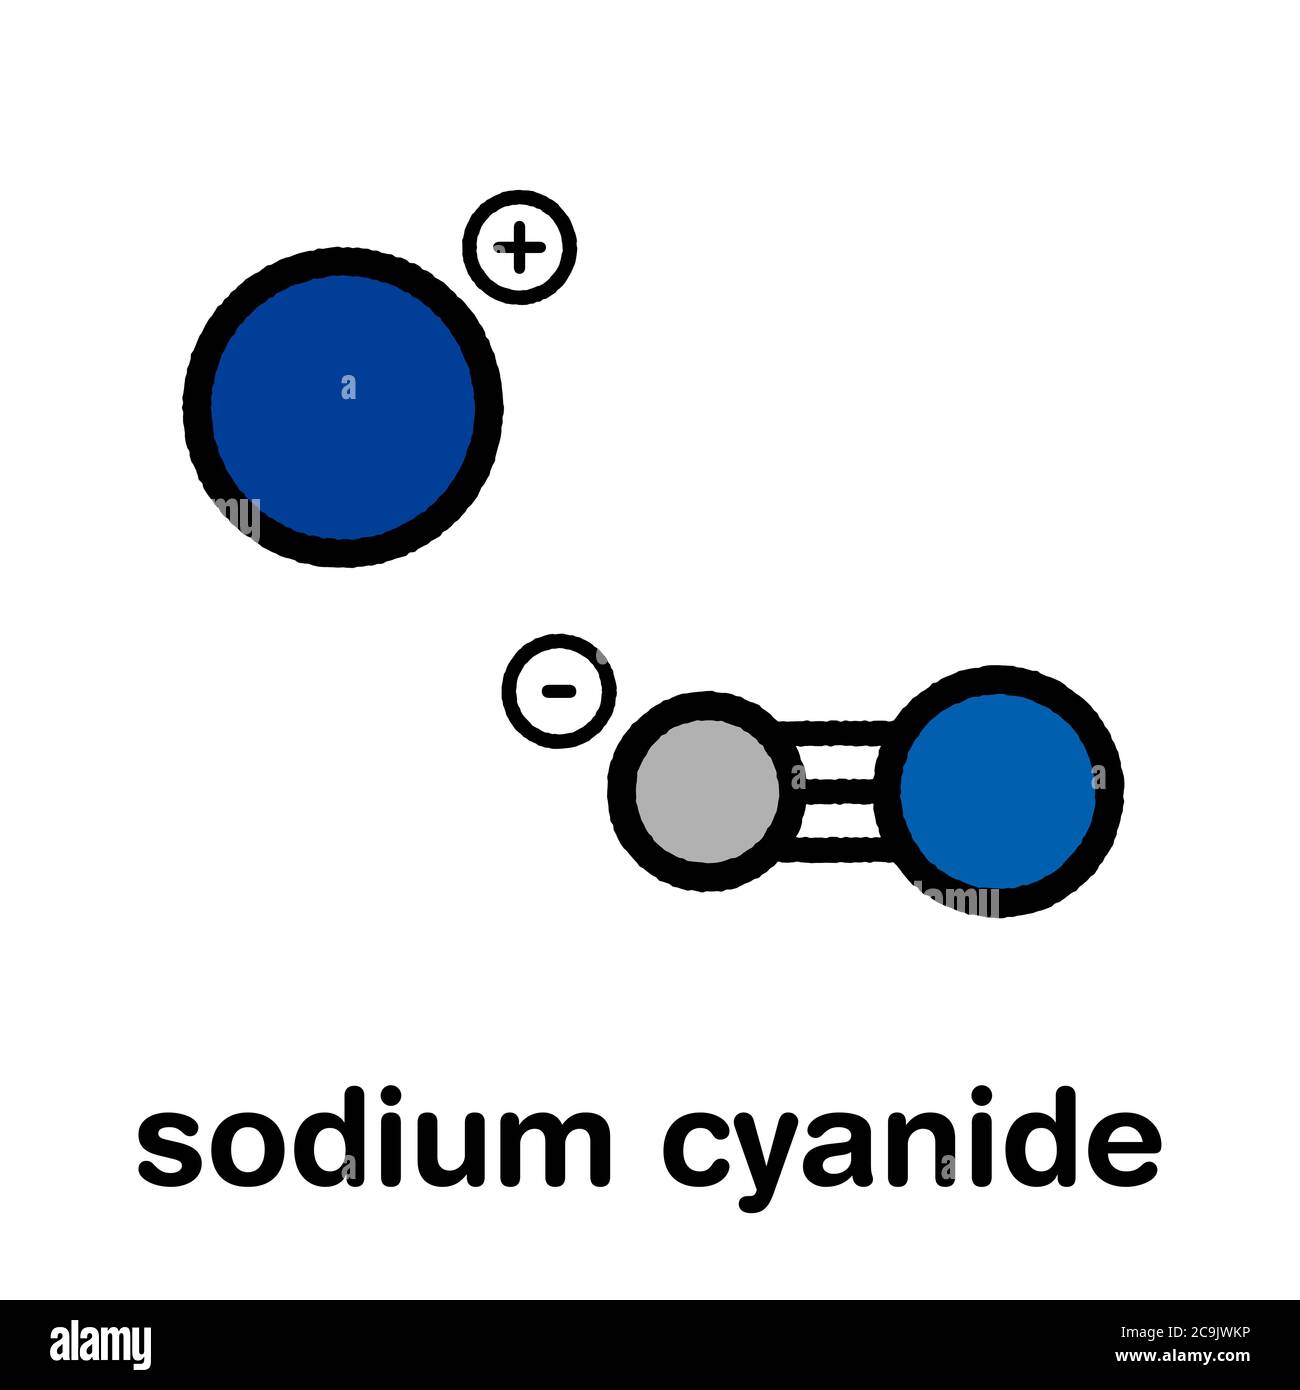 Sodium cyanide, chemical structure. Stylized skeletal formula (chemical structure): Atoms are shown as color-coded circles with thick black outlines a Stock Photo